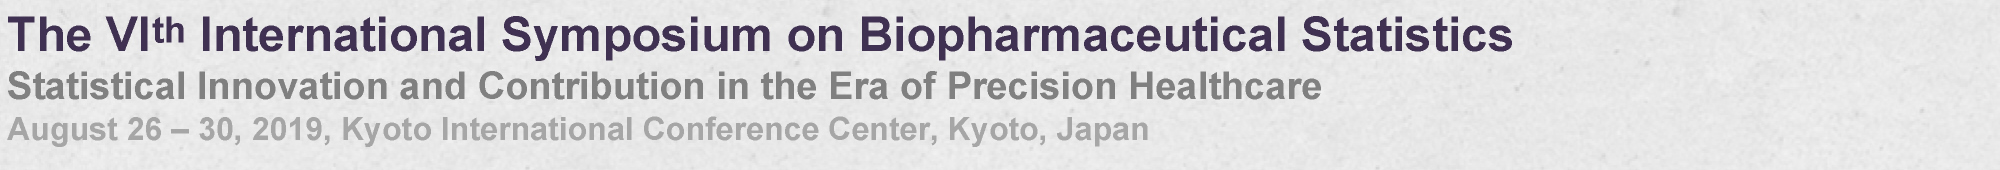 The VIth International Symposium on Biopharmaceutical Statistics
Statistical Innovation and Contribution in the Era of Precision Healthcare
August 26 – 30, 2019, Kyoto International Conference Center, Kyoto, Japan